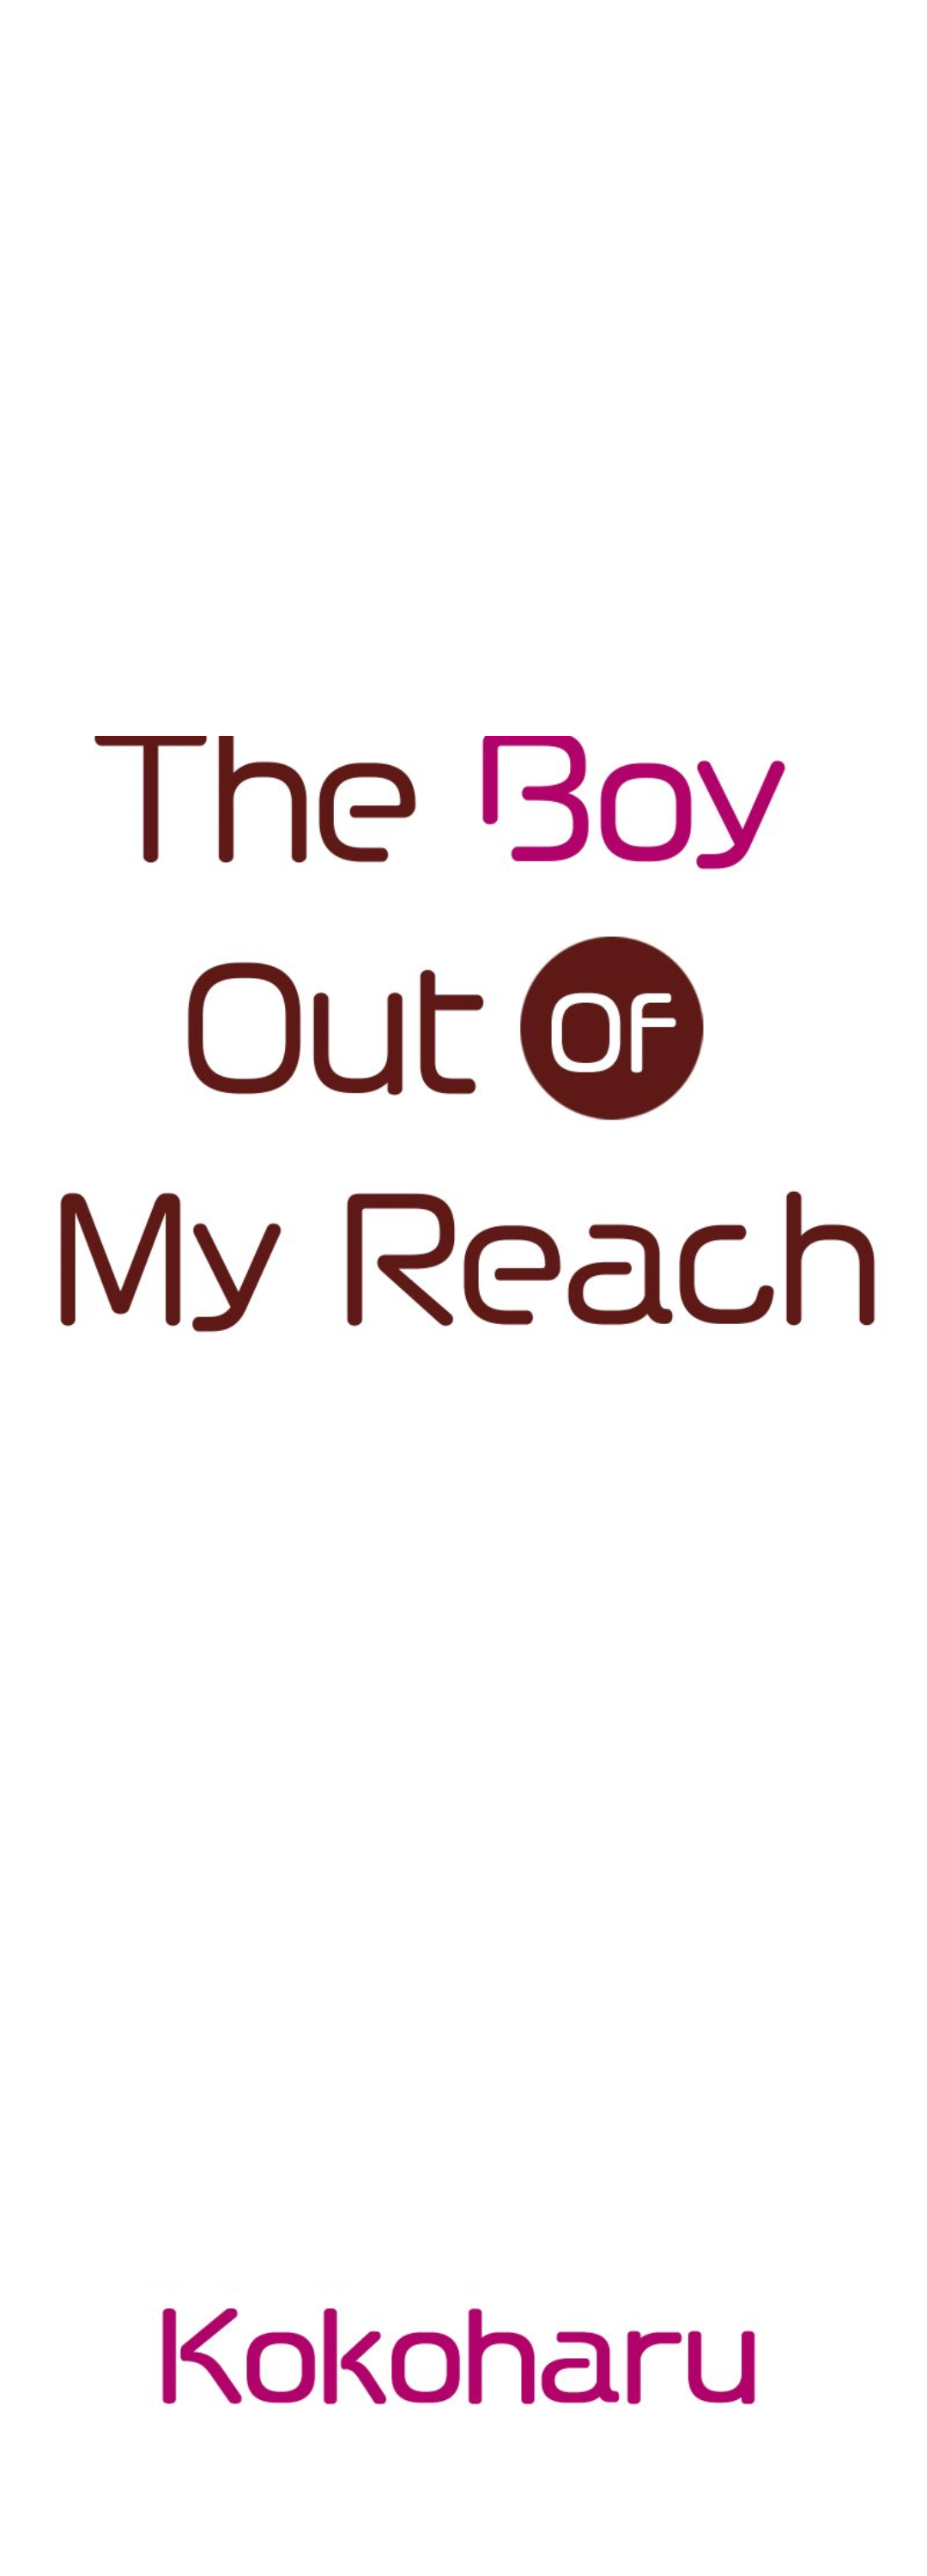 The Boy Out Of My Reach - Page 1